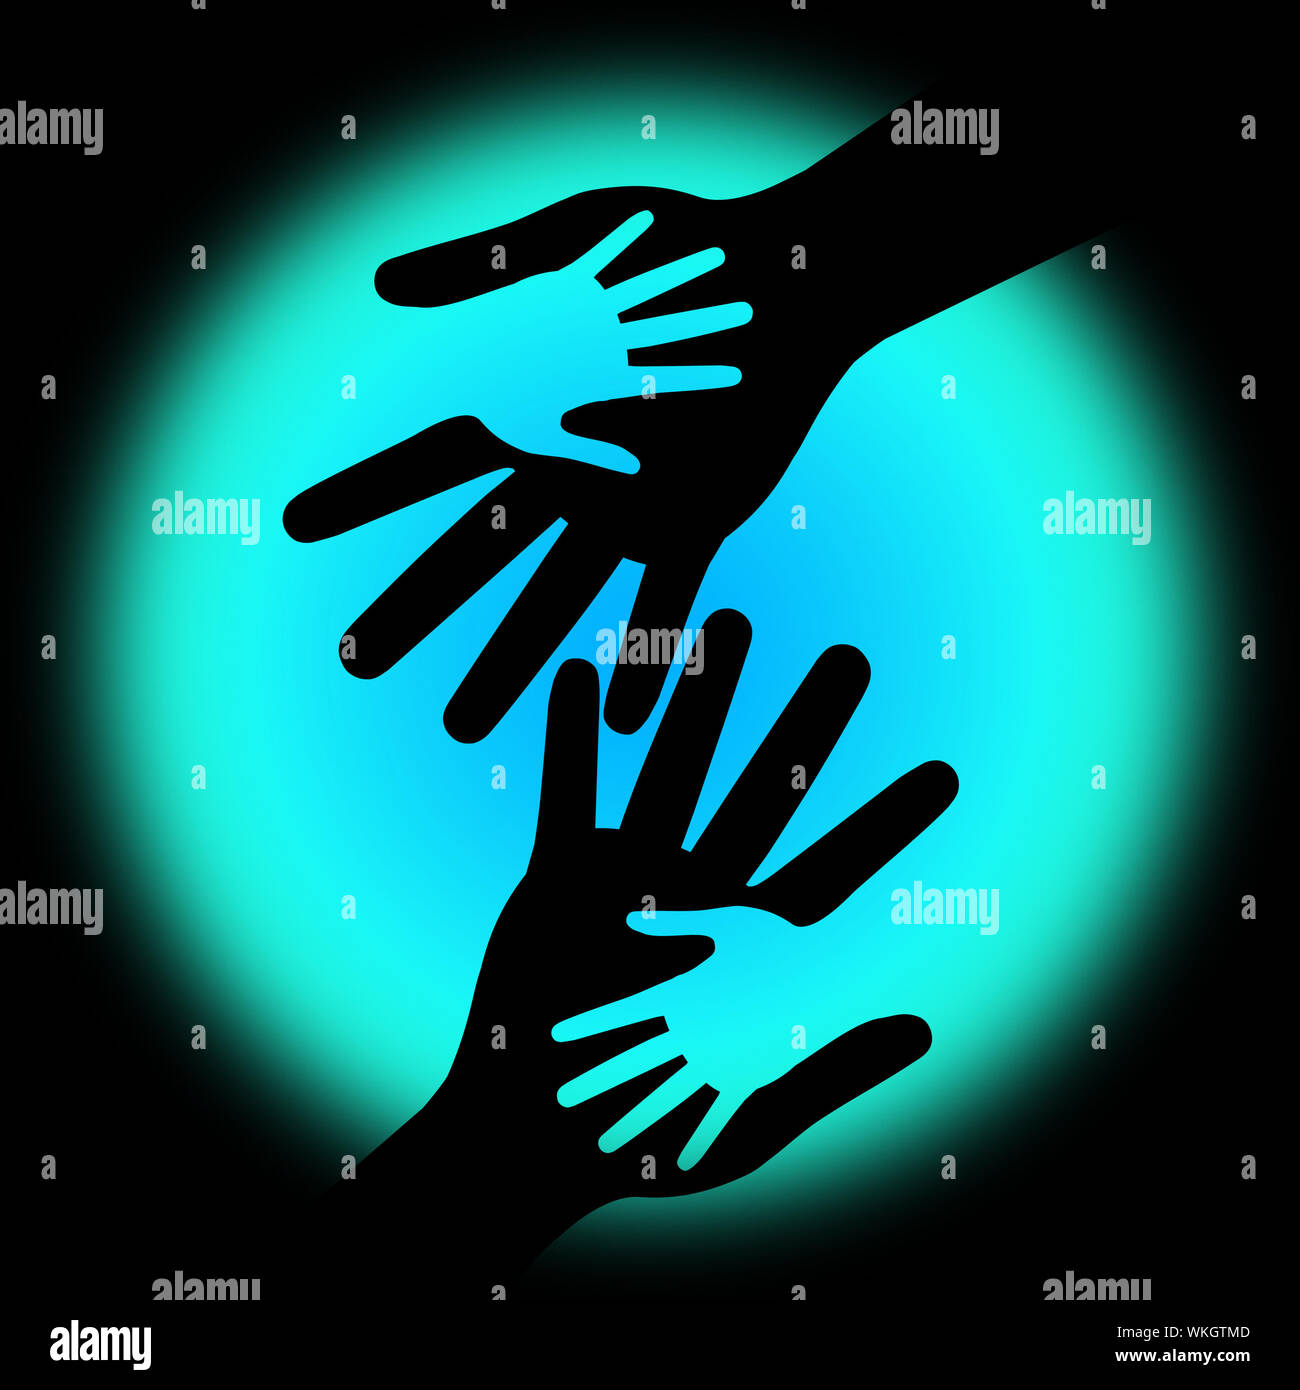 Holding Hands Meaning Kid Love And Together Stock Photo - Alamy